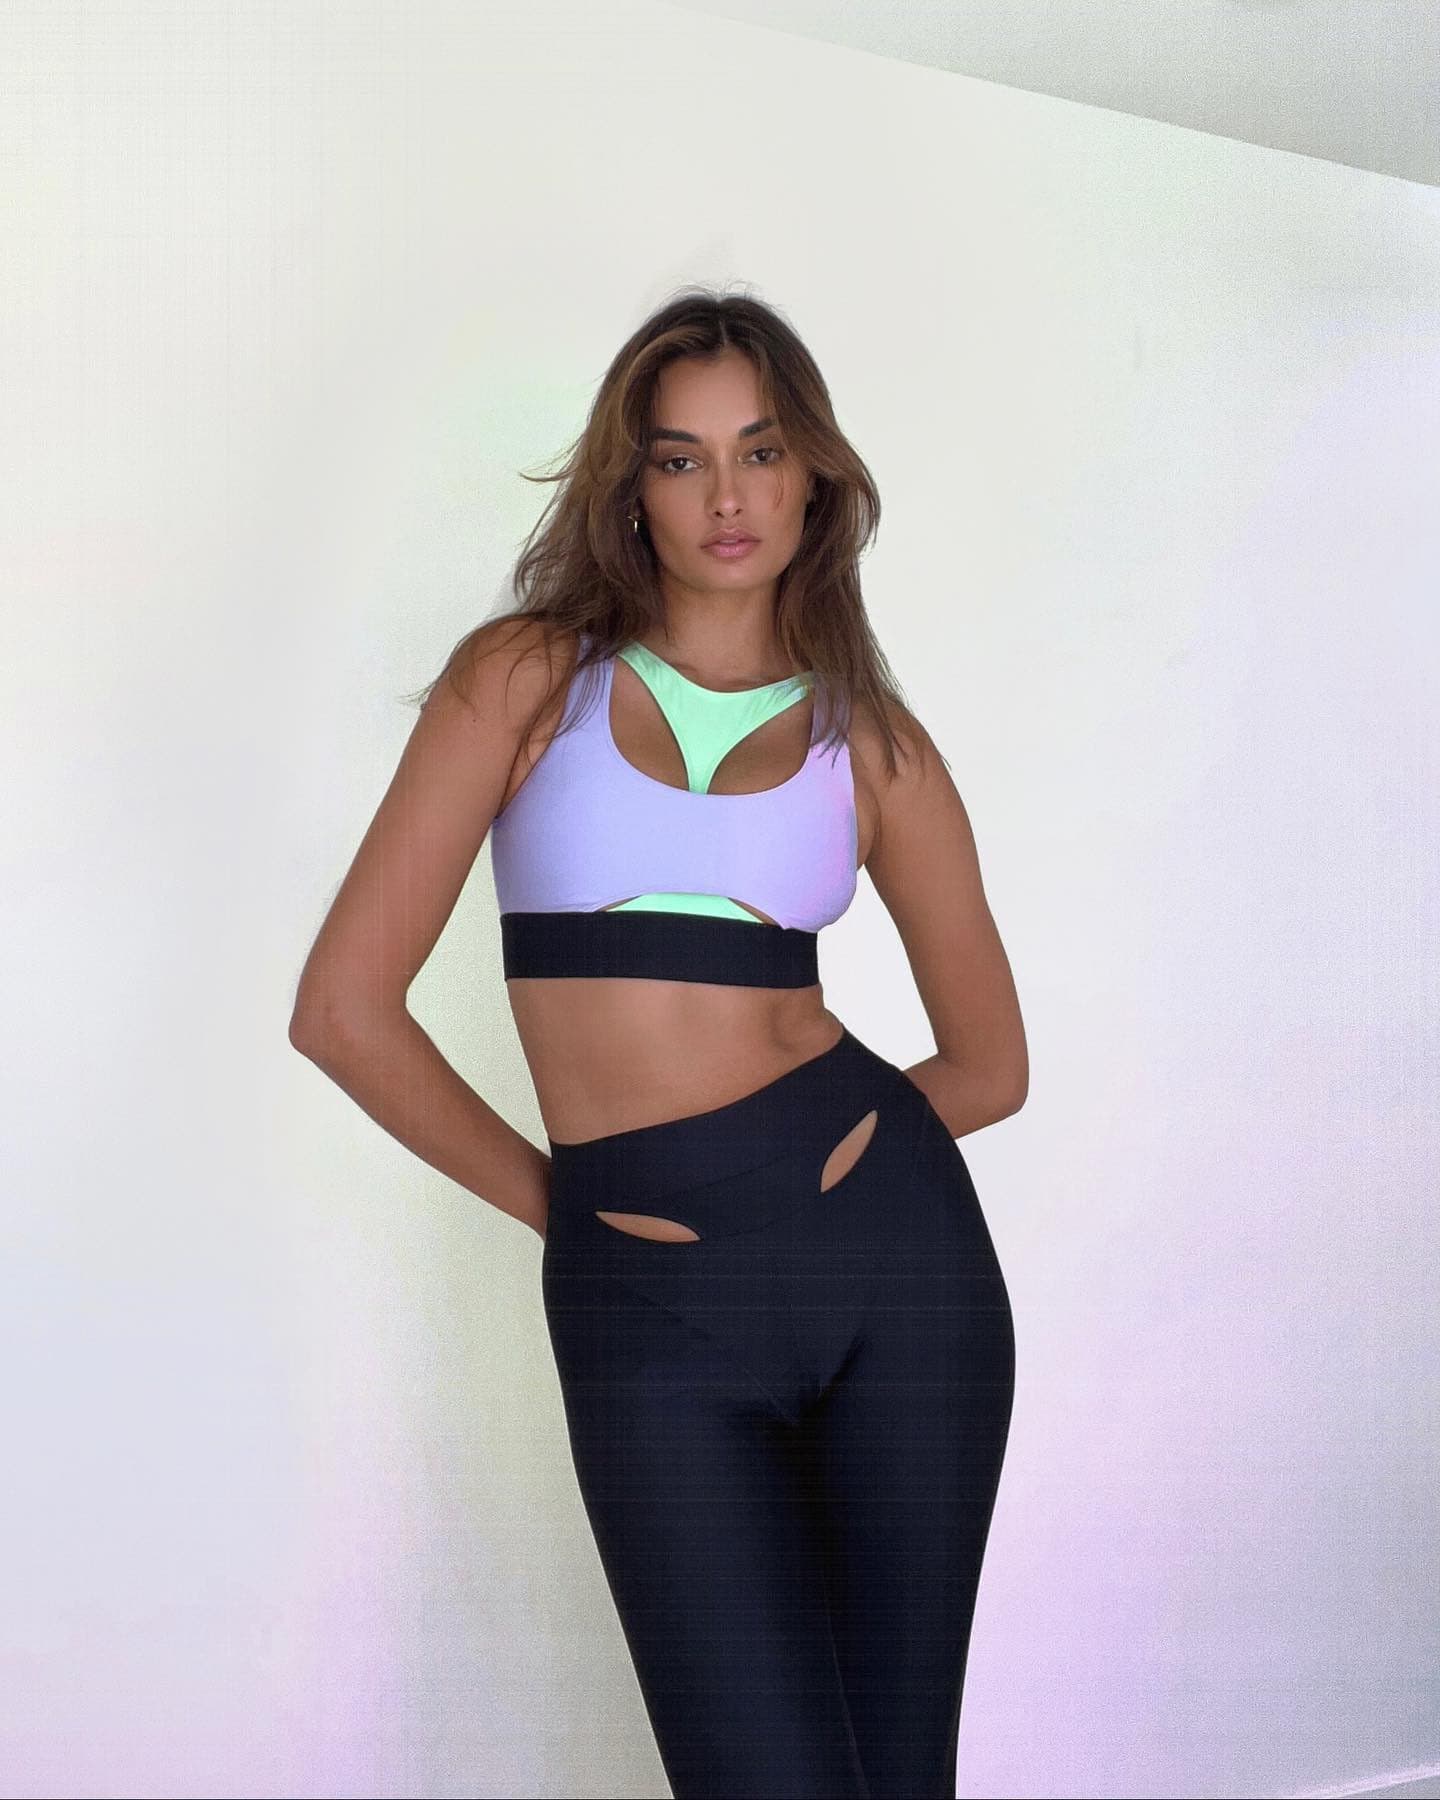 @giizeleoliveira wearing a neon purple and green bra with statement cutouts paired with a pair of black leggings featuring front high-waist cutouts while posing against a white wall.  